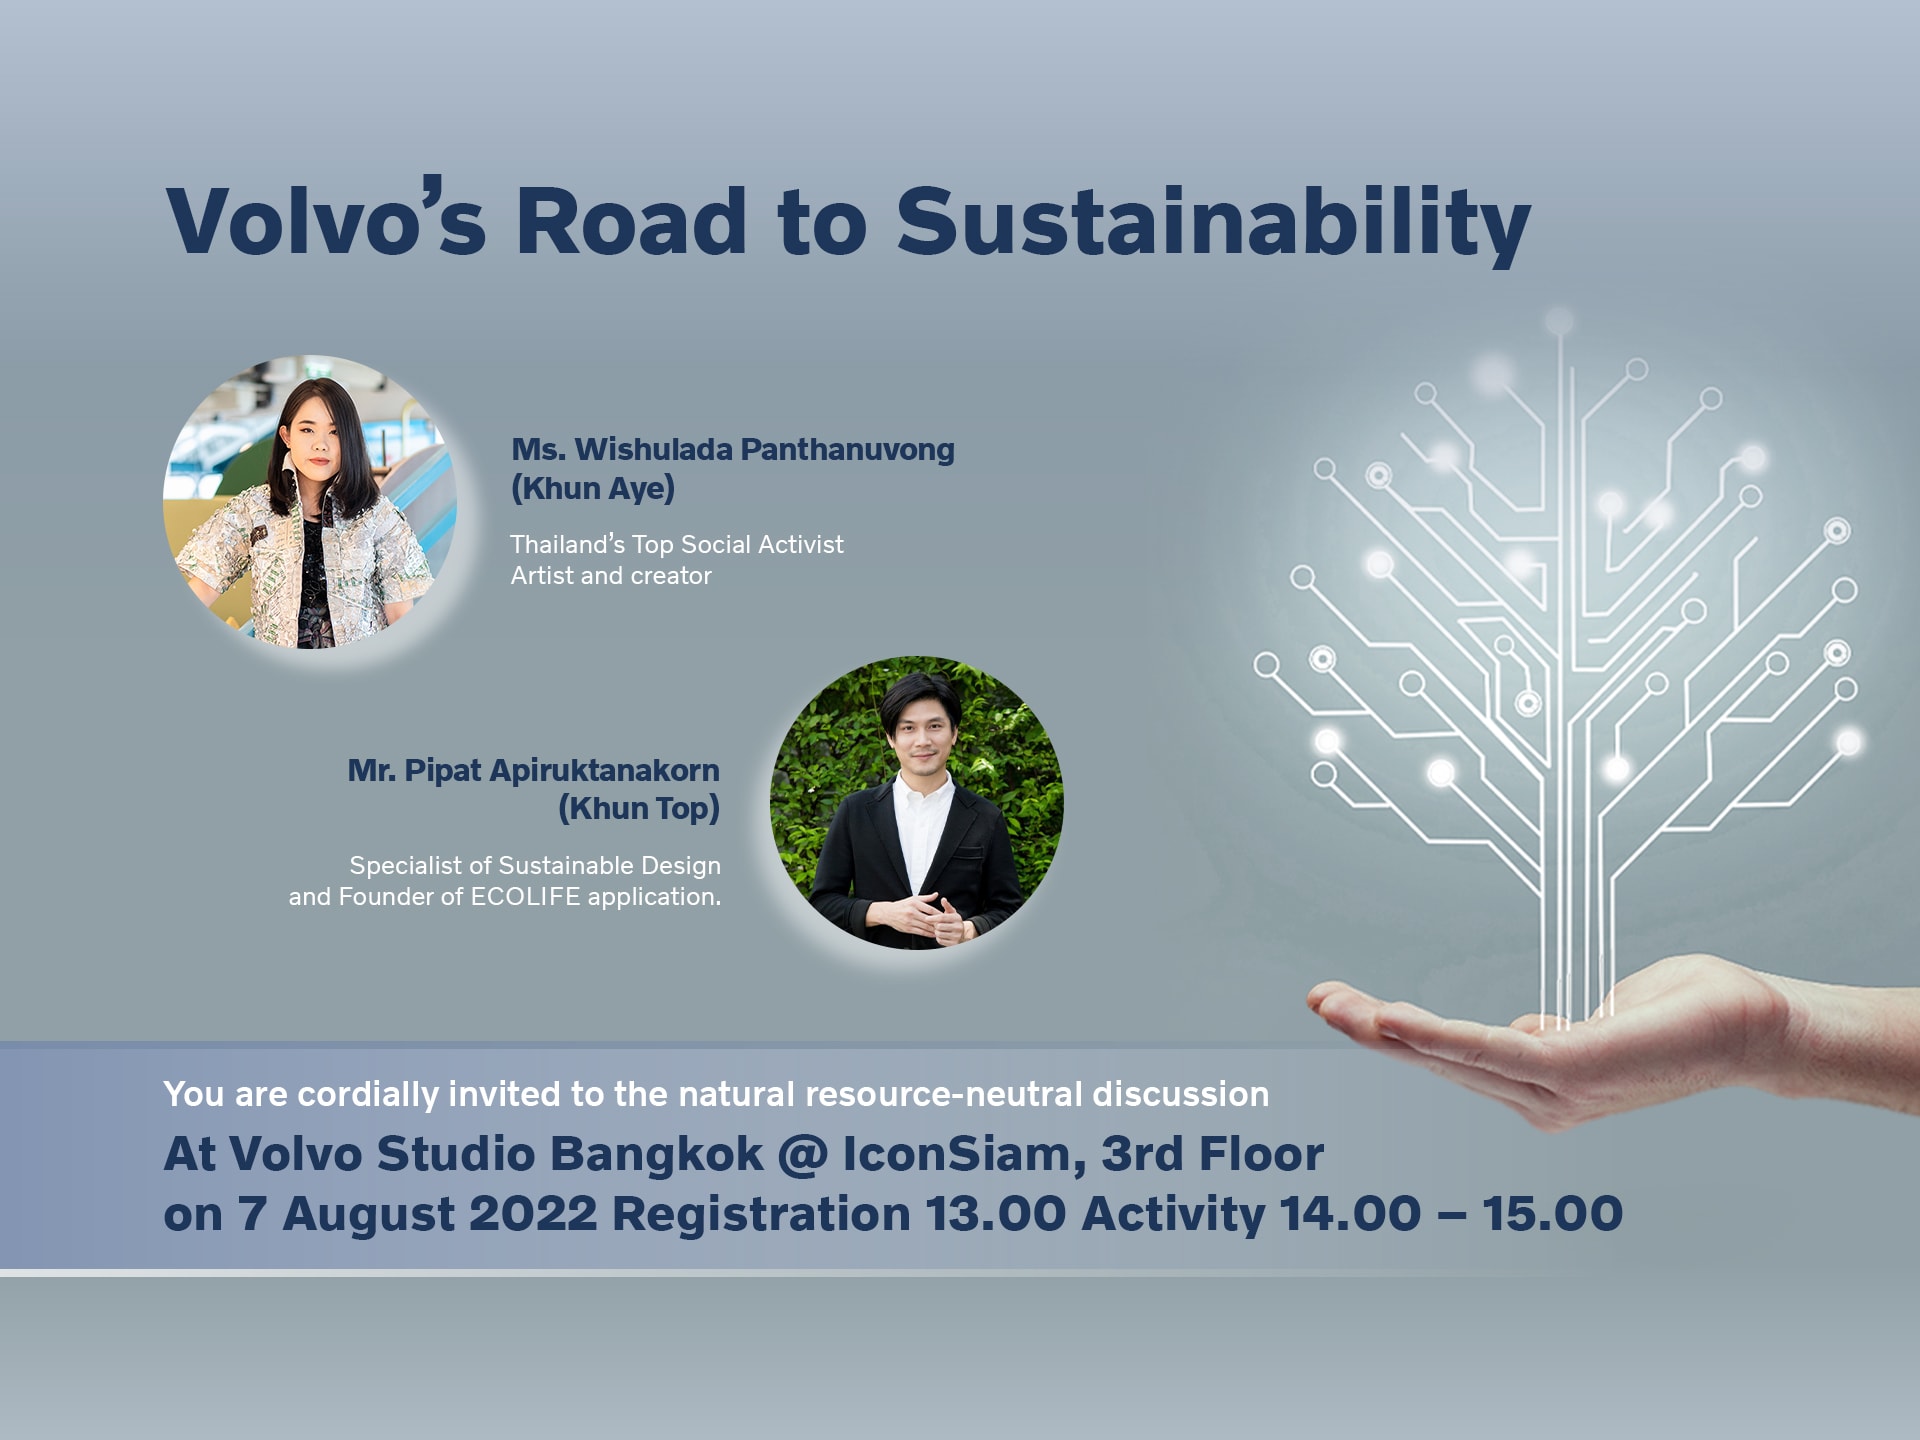 Volvo’s Road to Sustainability